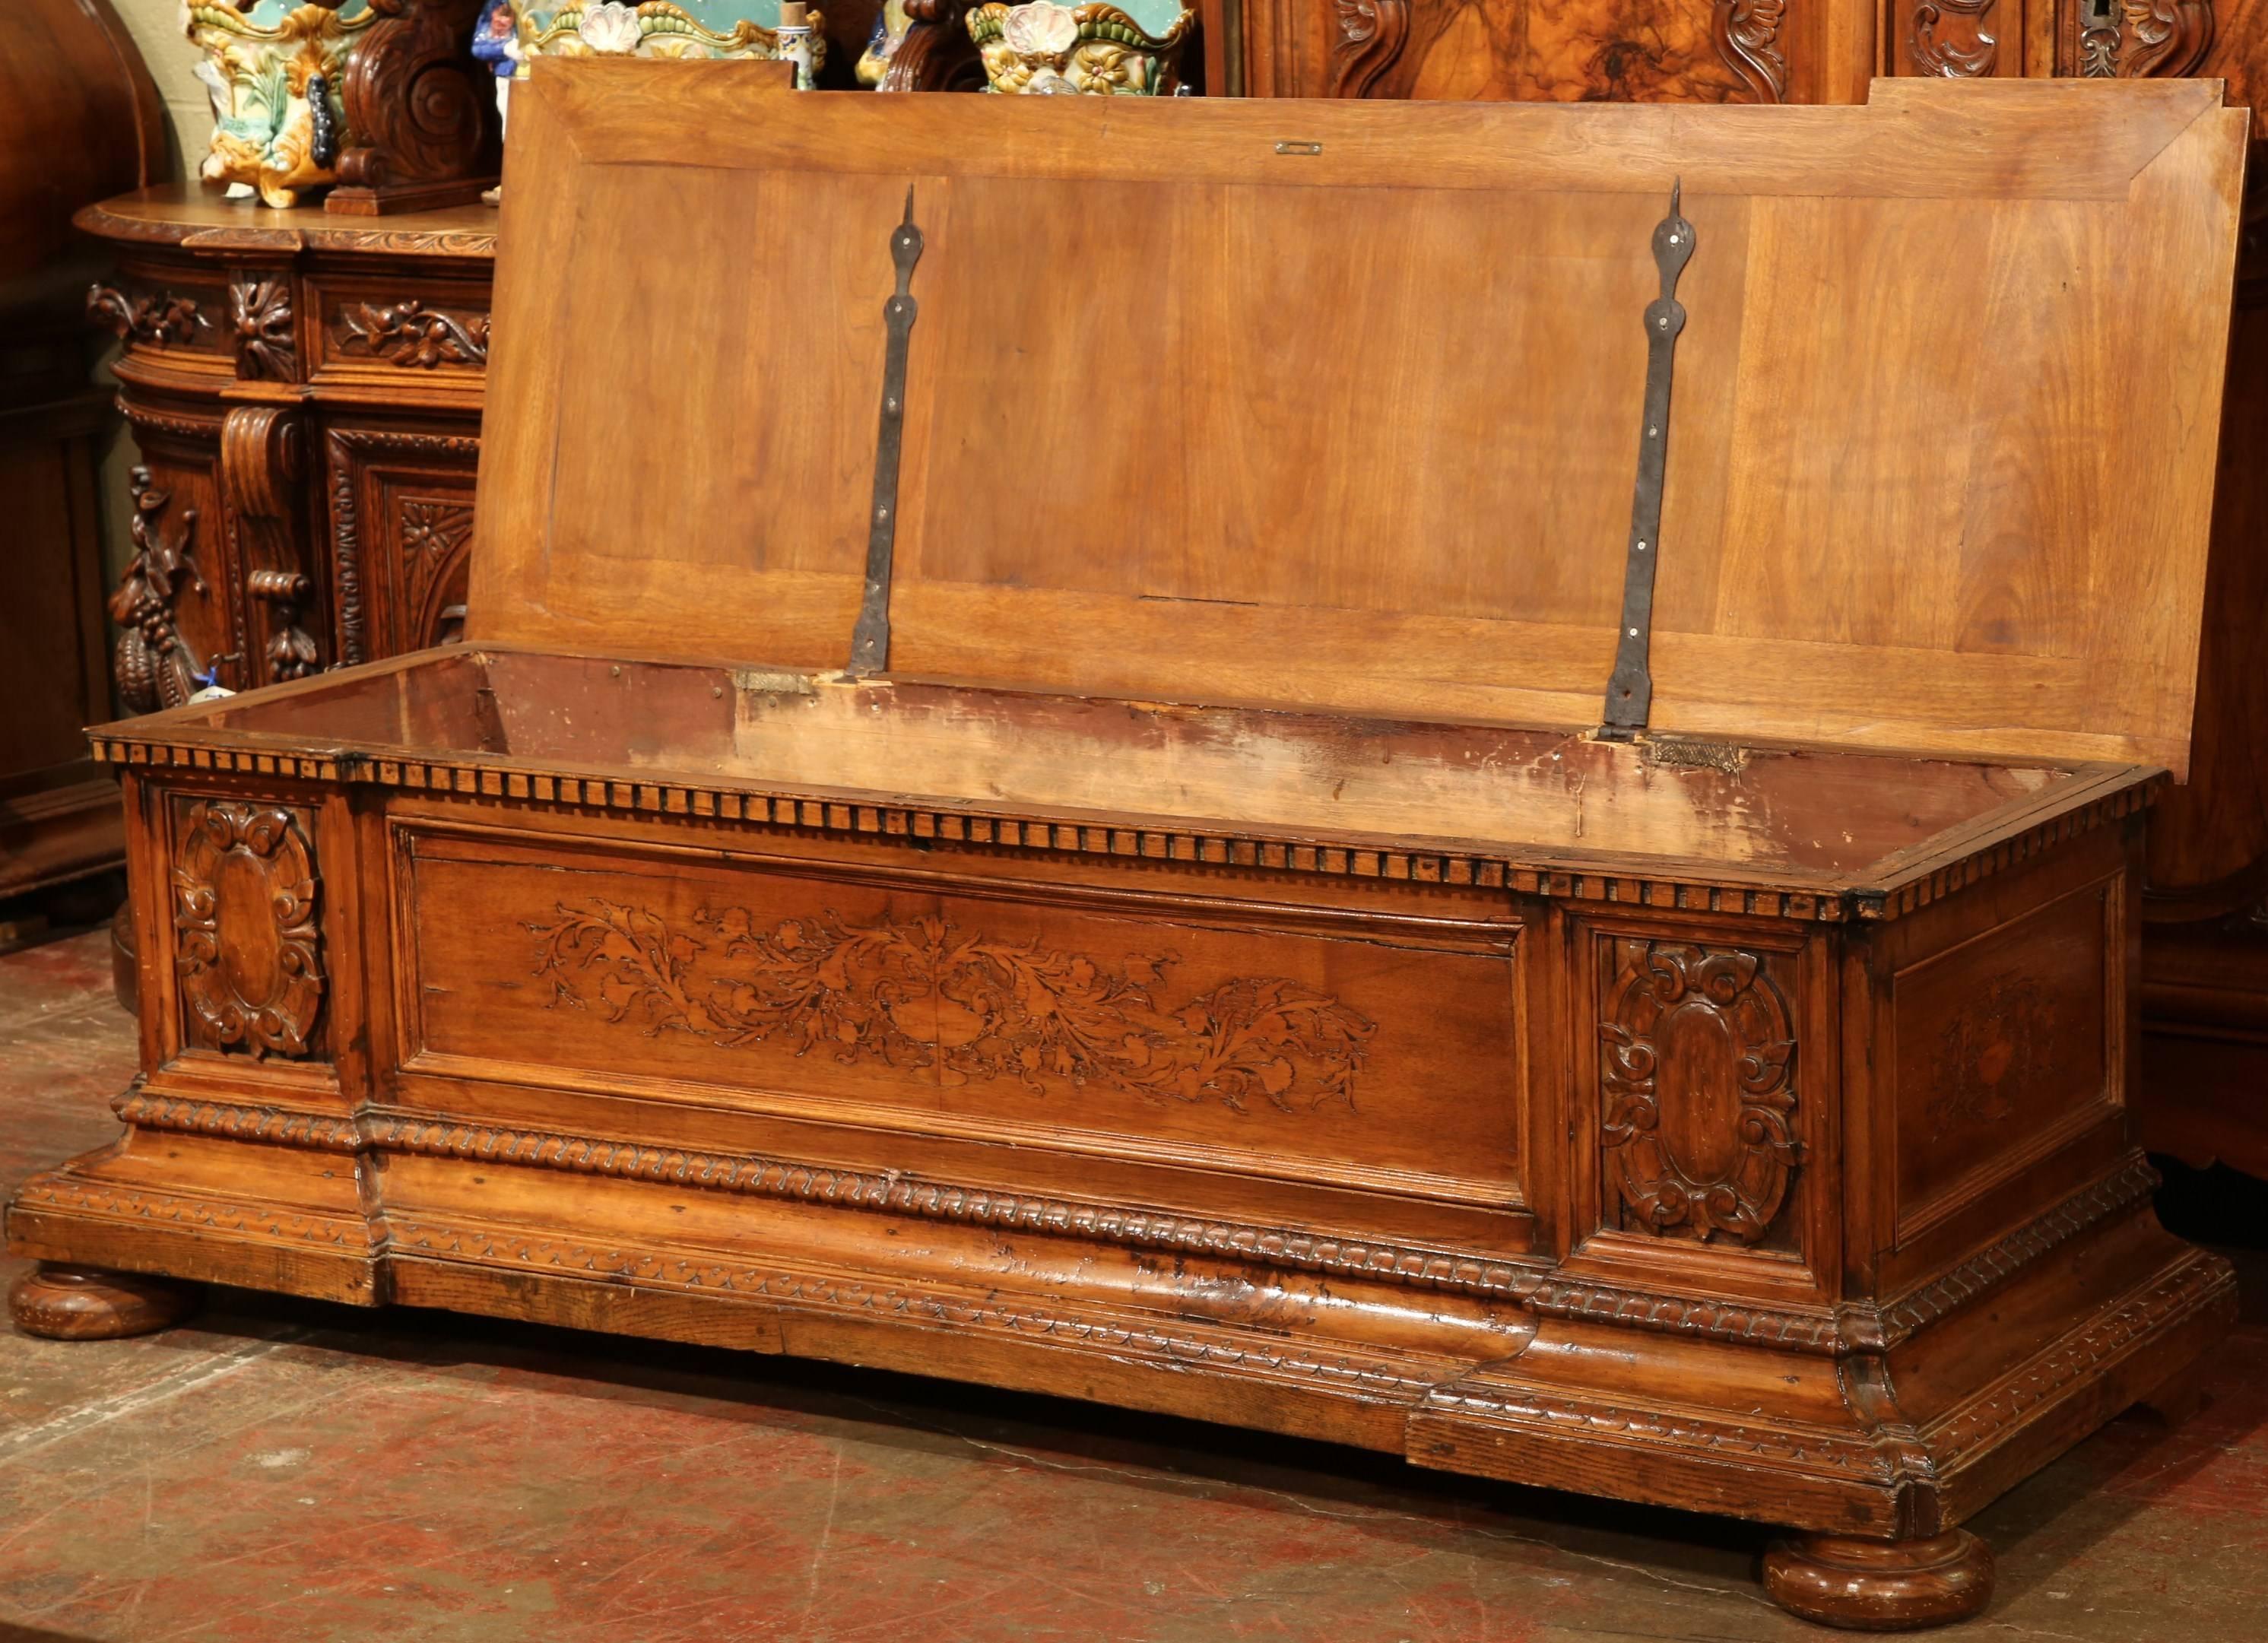 Place this large antique fruitwood blanket chest at the foot of any king-size bed, or in an entry! Crafted in the Alps mountains of France, circa 1860, the trunk features marquetry inlay decor with flowers on the facade and both sides, a pair of